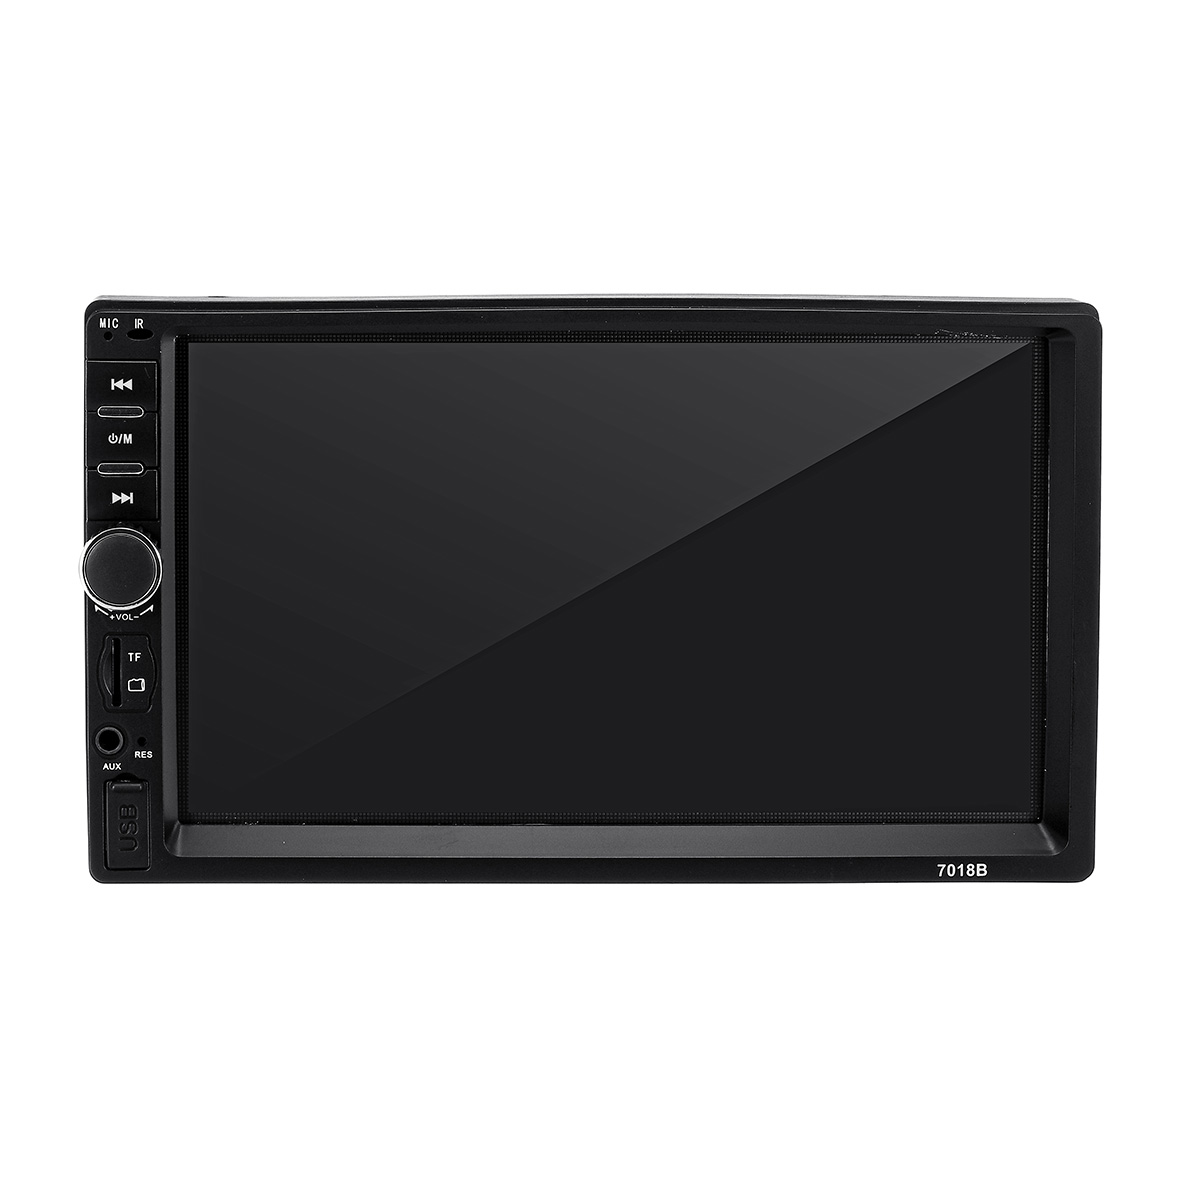 7018B 7 Inch Double Din Car MP5 Player IPS Full View Touch Screen Stereo FM Radio Bluetooth with Backup Camera - Auto GoShop